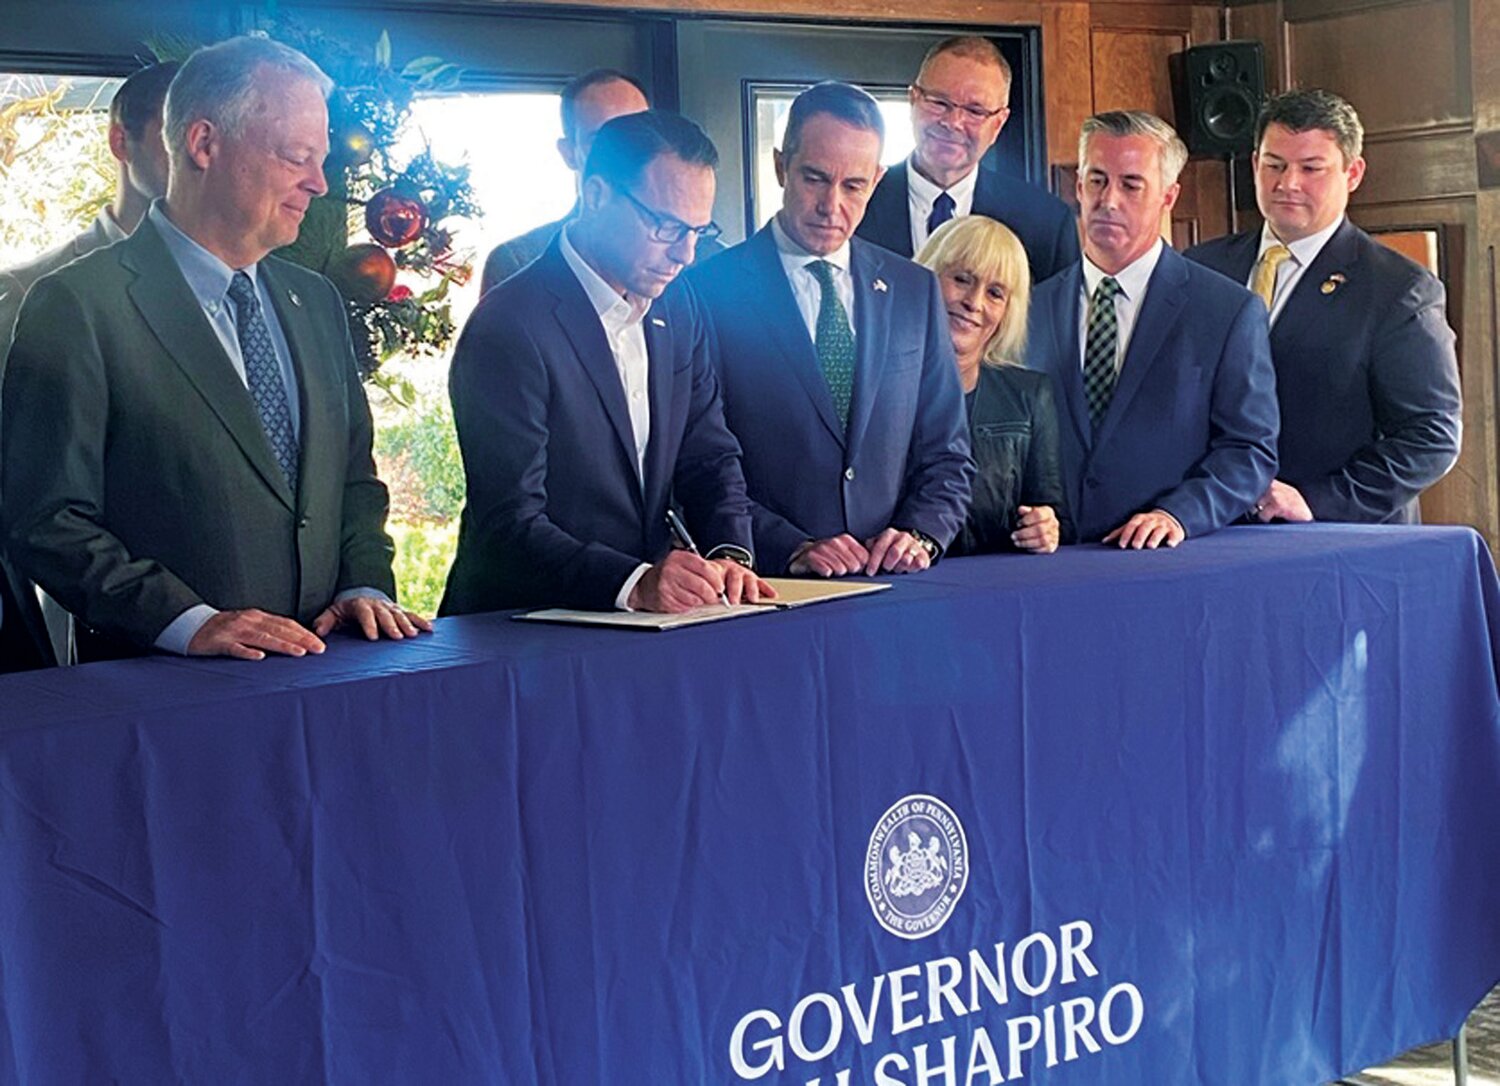 Flanked by Rep. Perry Warren, left, and Pa. Sen. Steve Santarsiero, right, Pennsylvania Governor Josh Shapiro signs House Bill 735 in late 2023 at The Yardley Inn. HB 735 creates the Flood Insurance Premium Assistance Task Force.